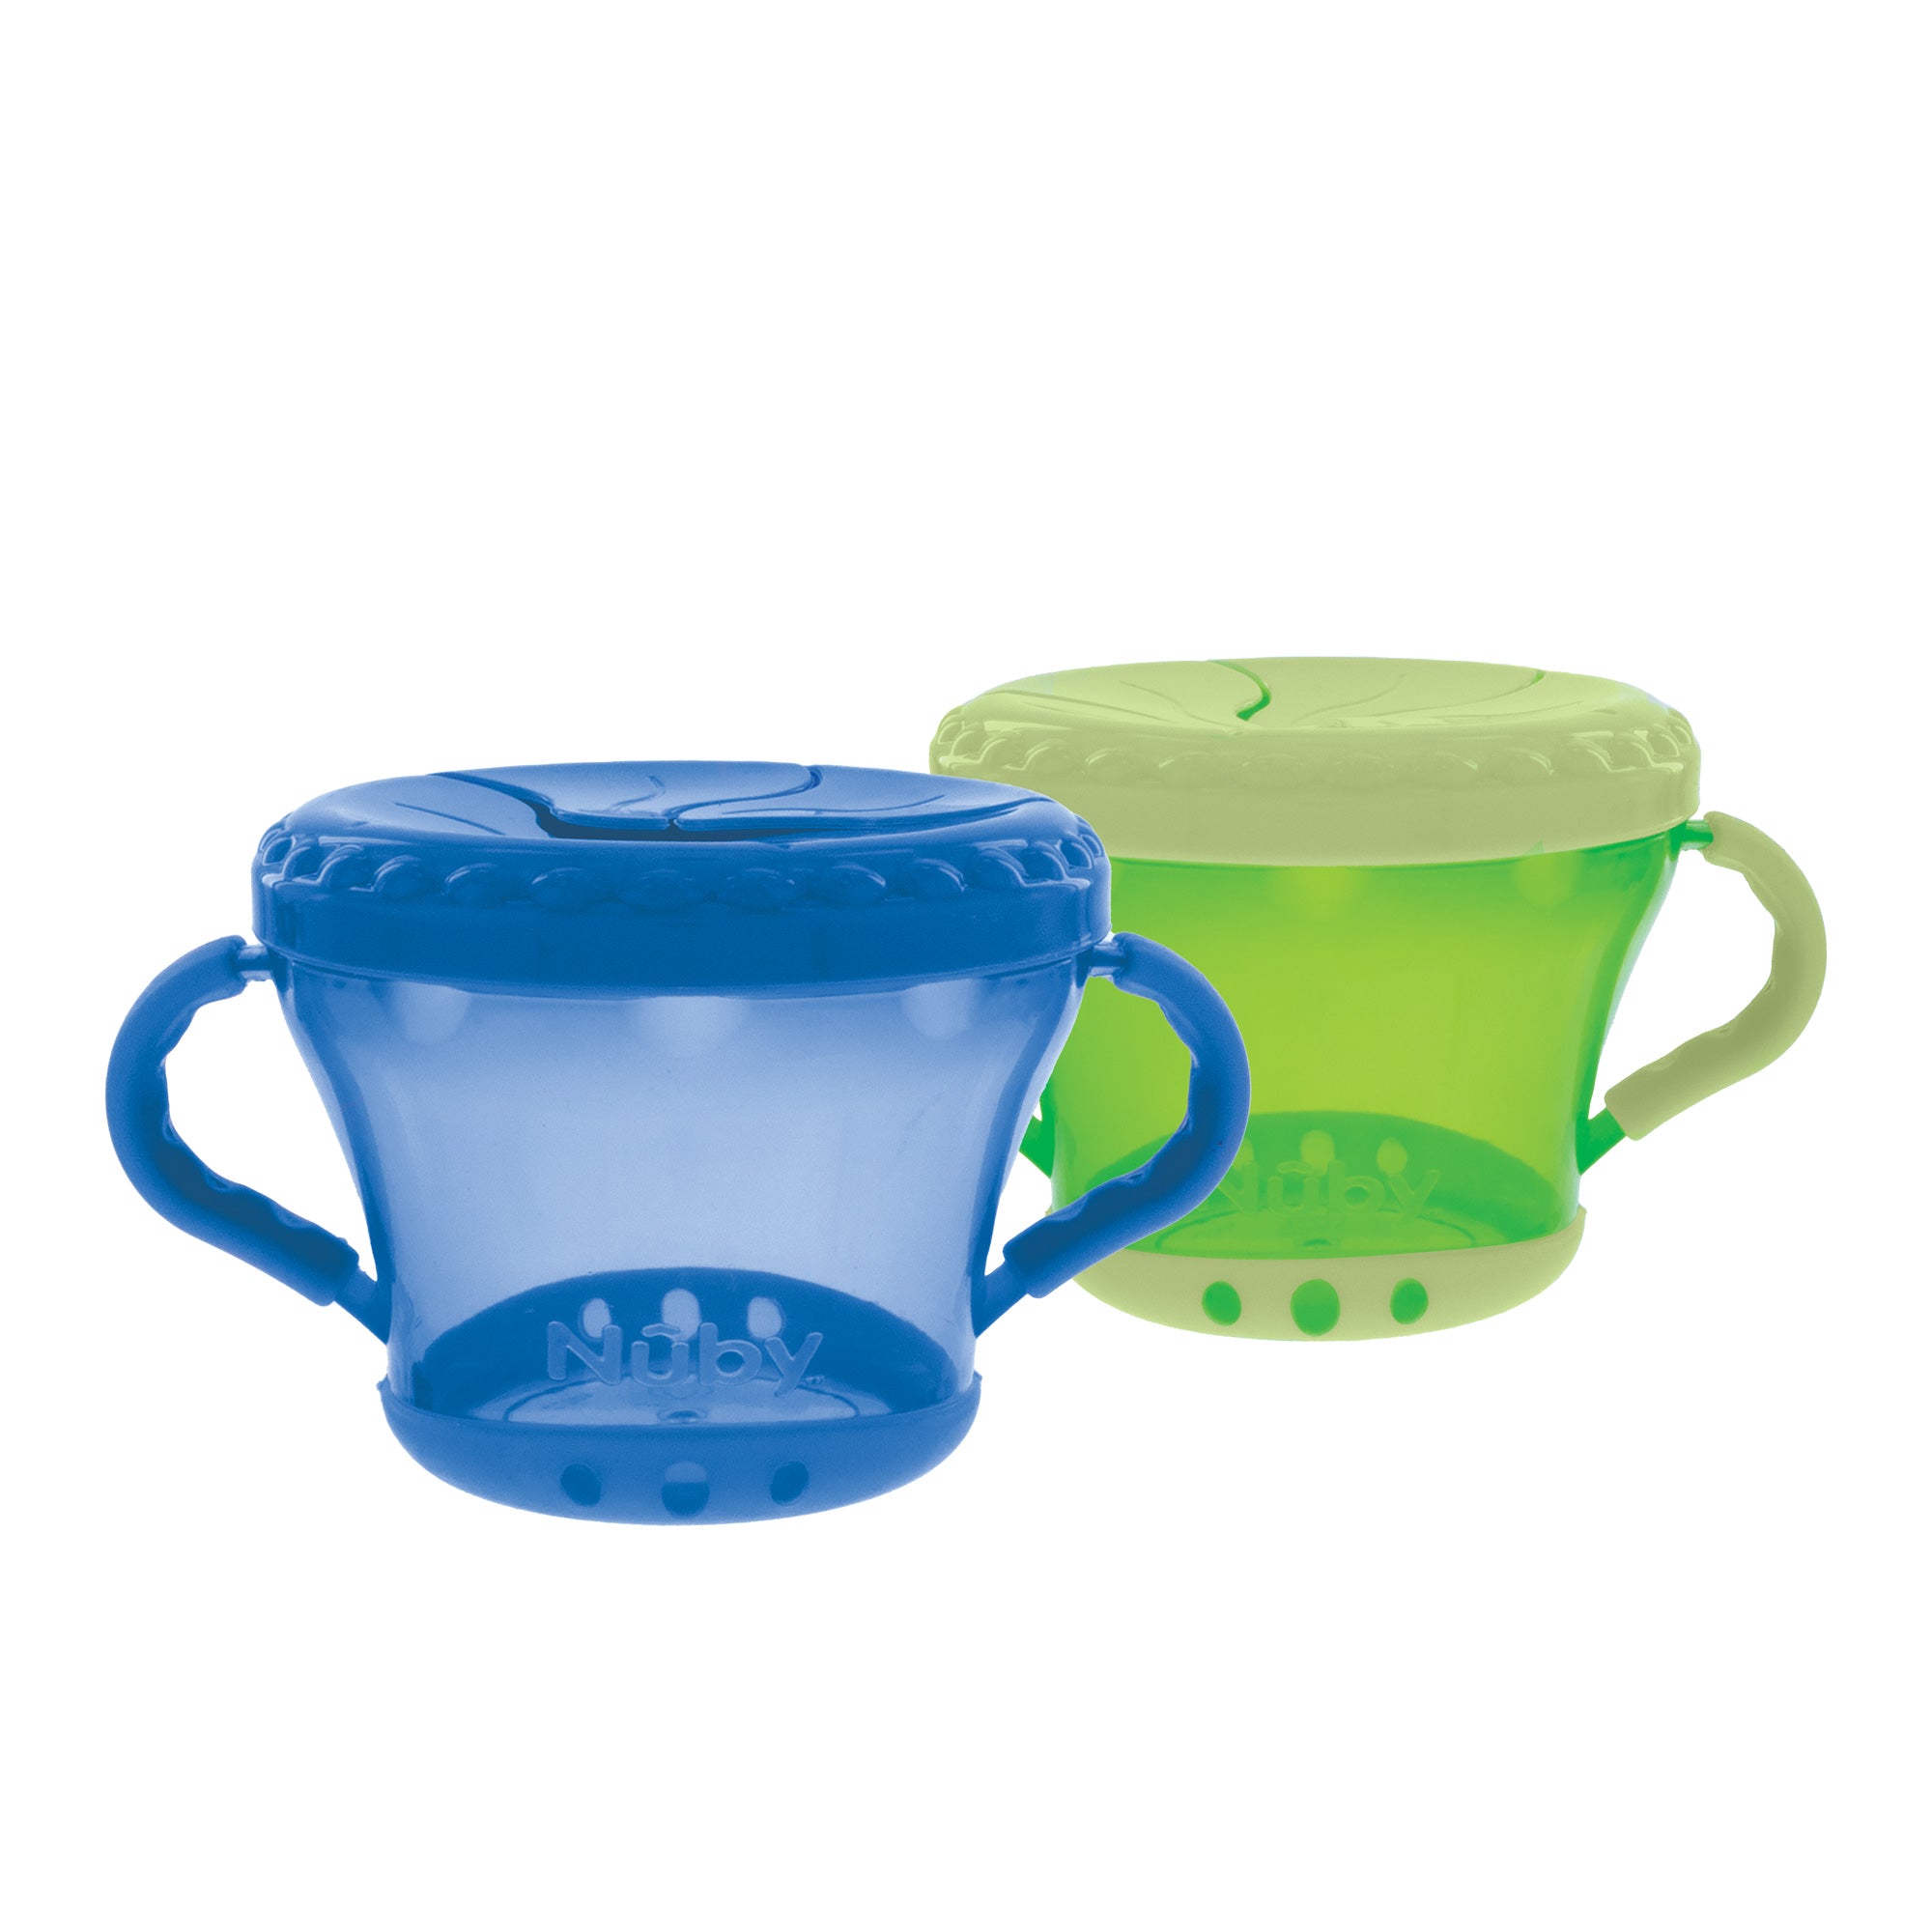 Munchkin Snack Catcher Toddler Snack Cups, 4 Pack, Blue/Green/Pink/Purple